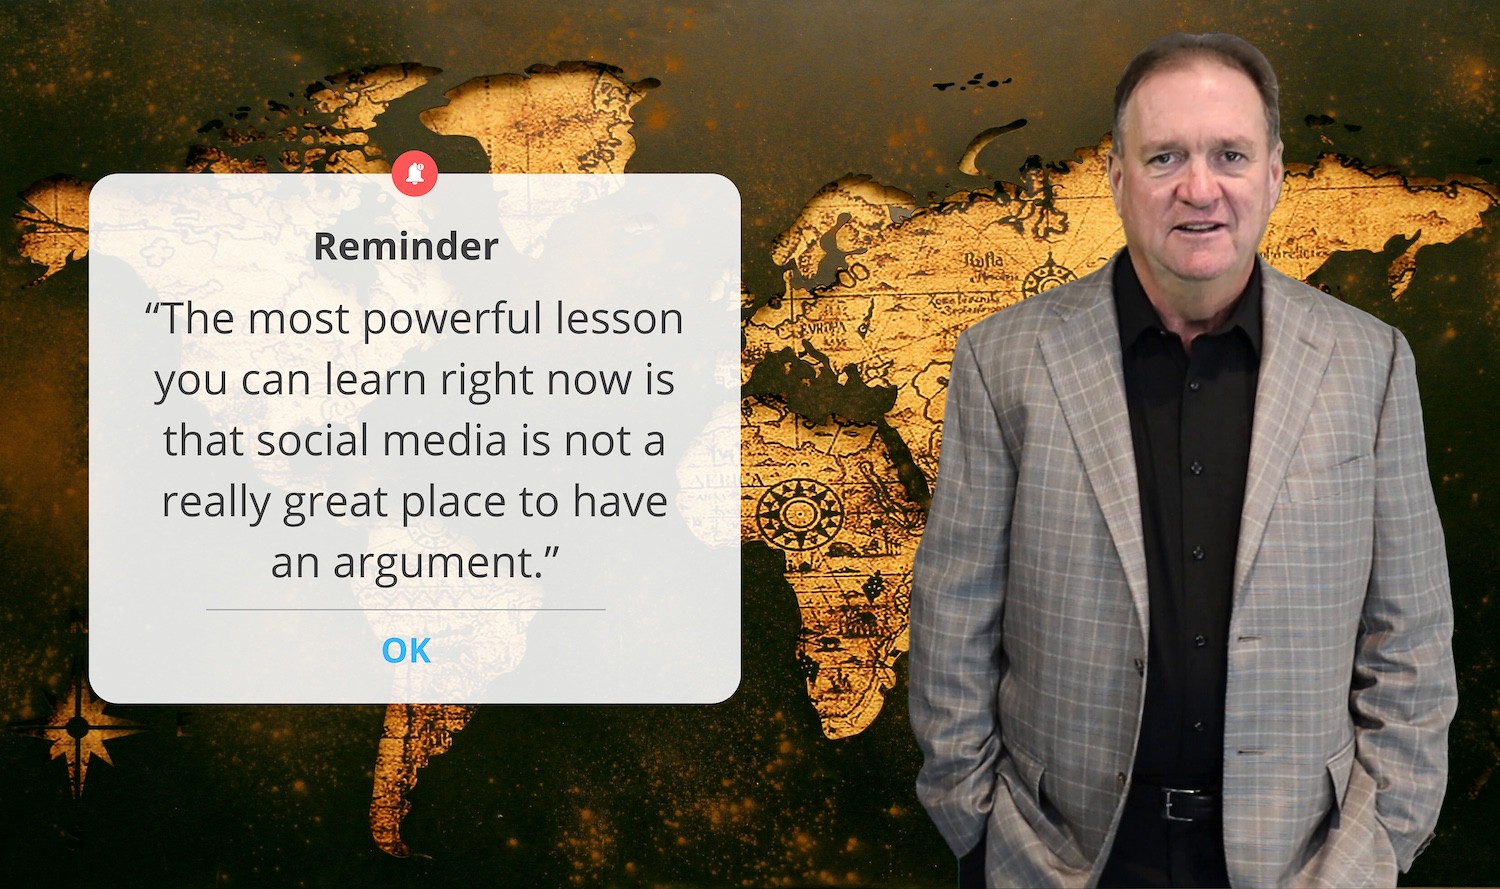 "The most powerful lesson you can learn right now is that social media is not a really great place to have an argument." - Futurist Jim Carroll